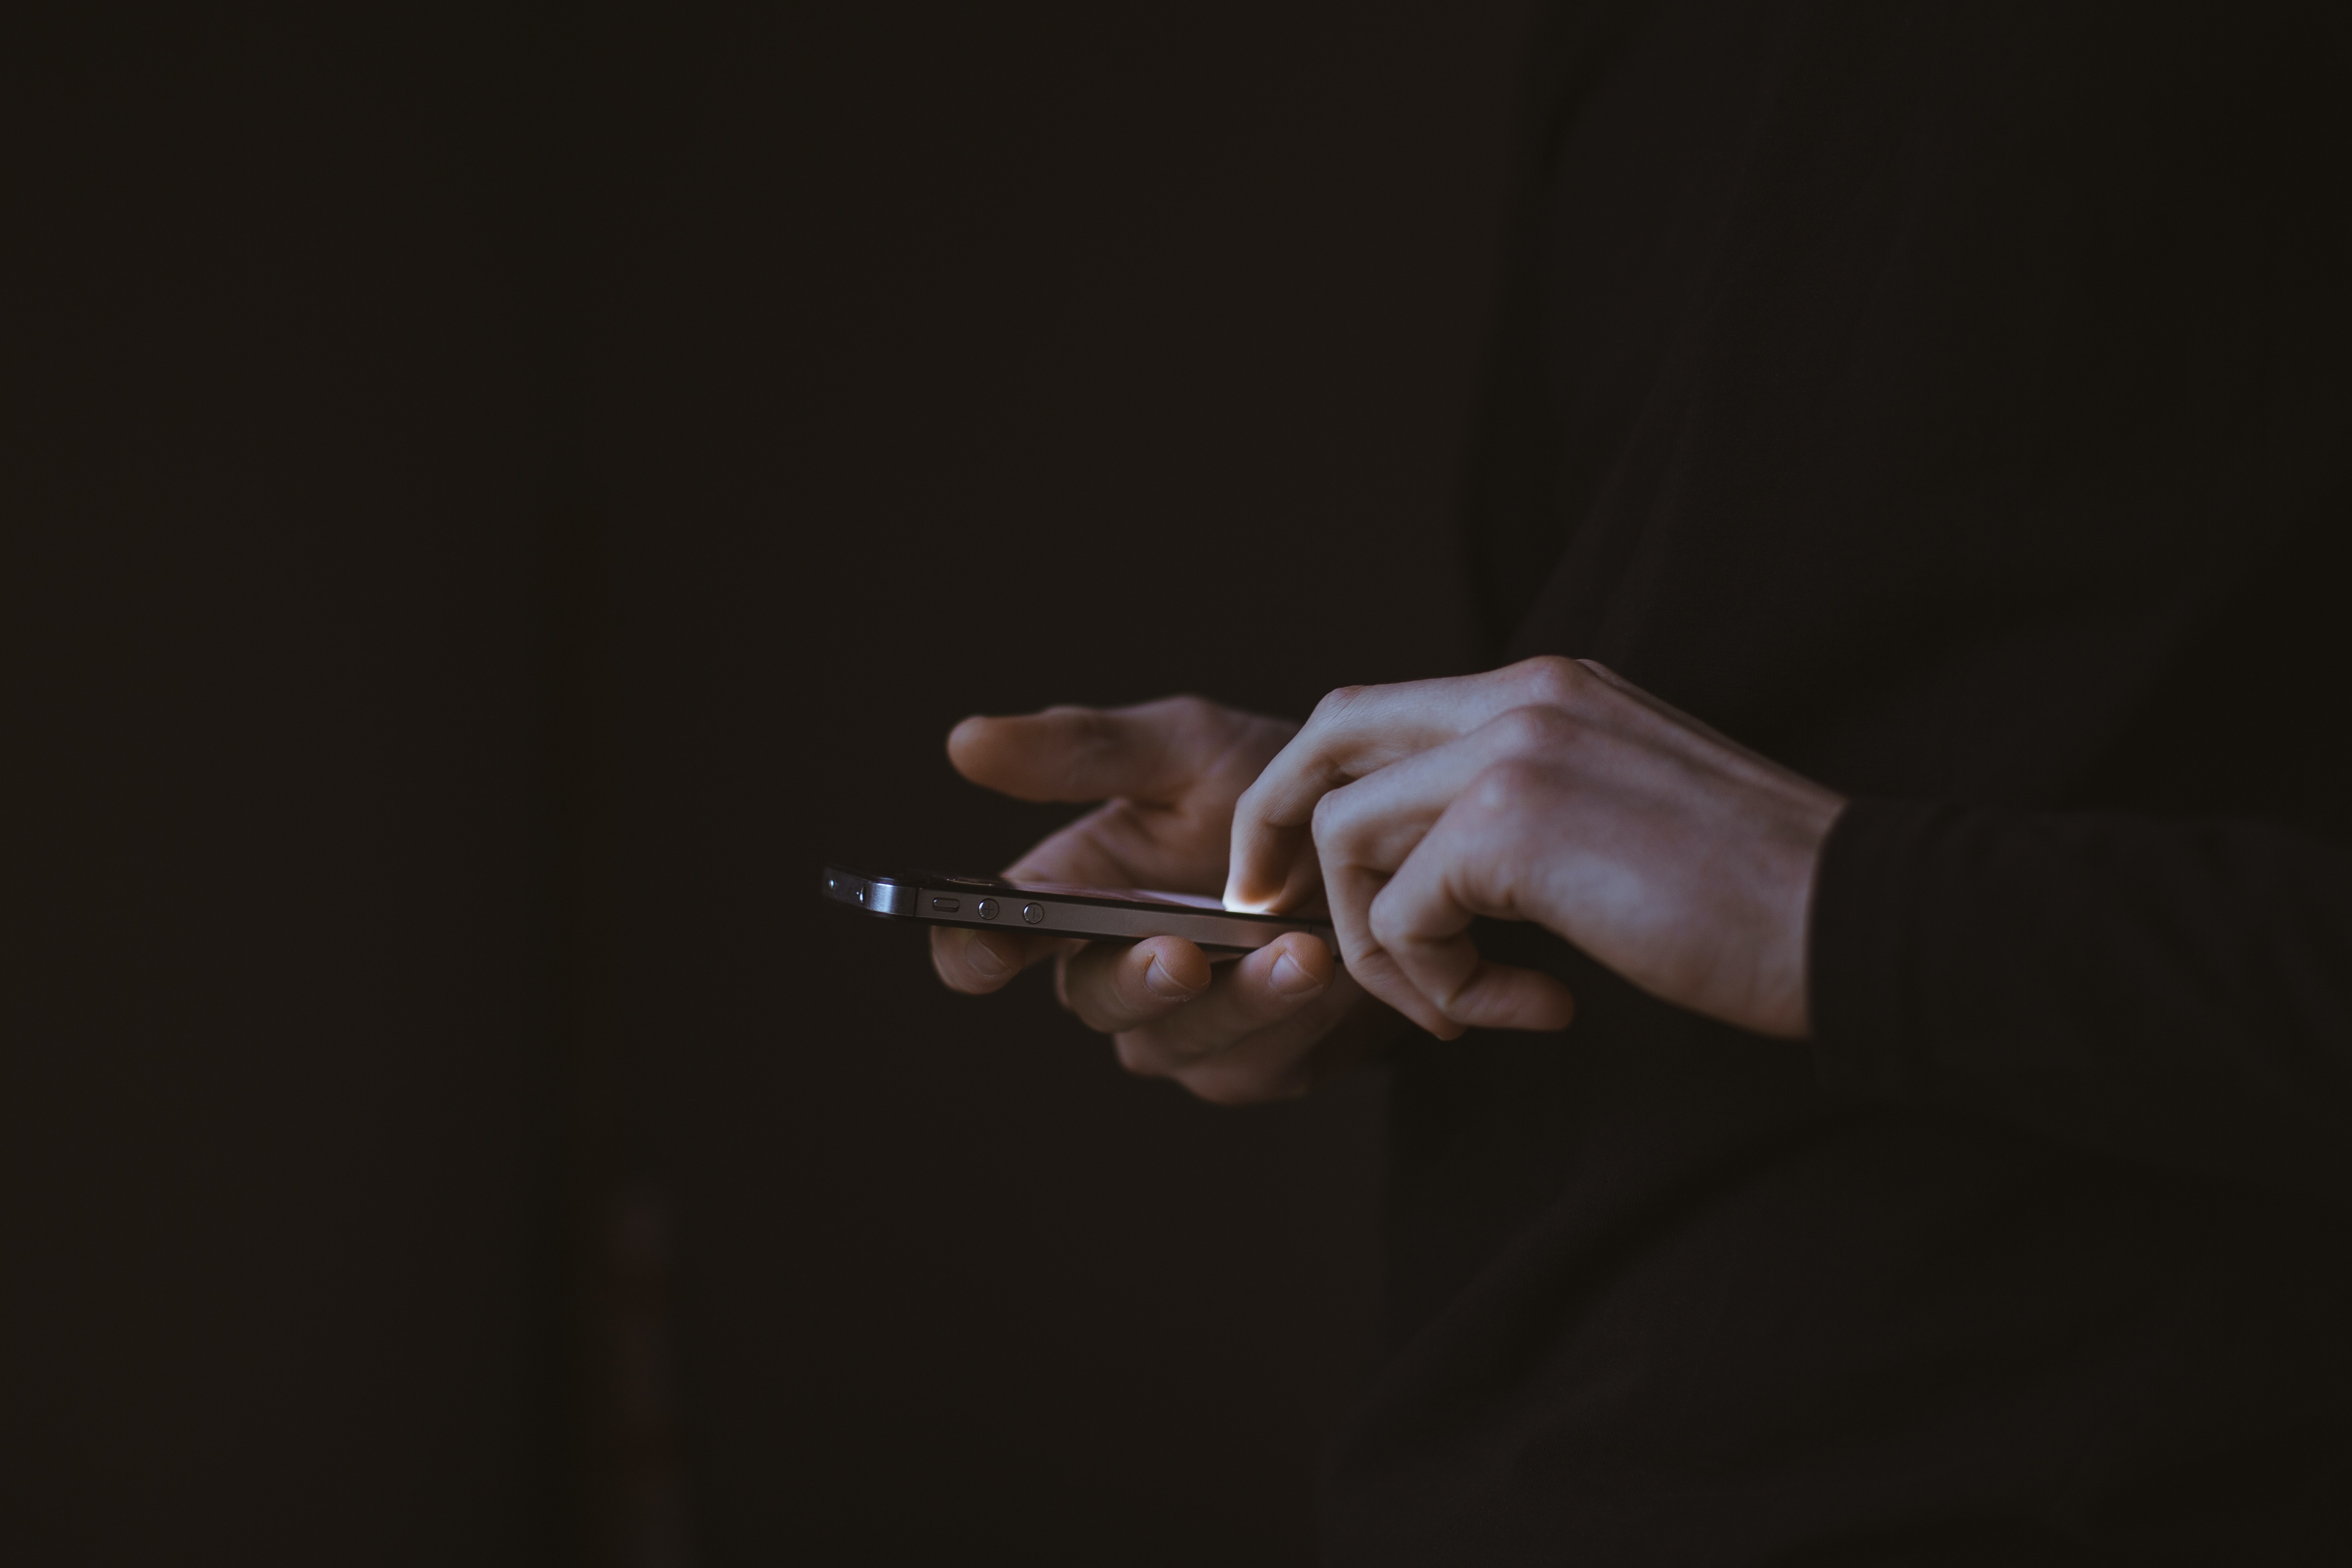 A man holding a smartphone in his hands overlayed on a dark background.